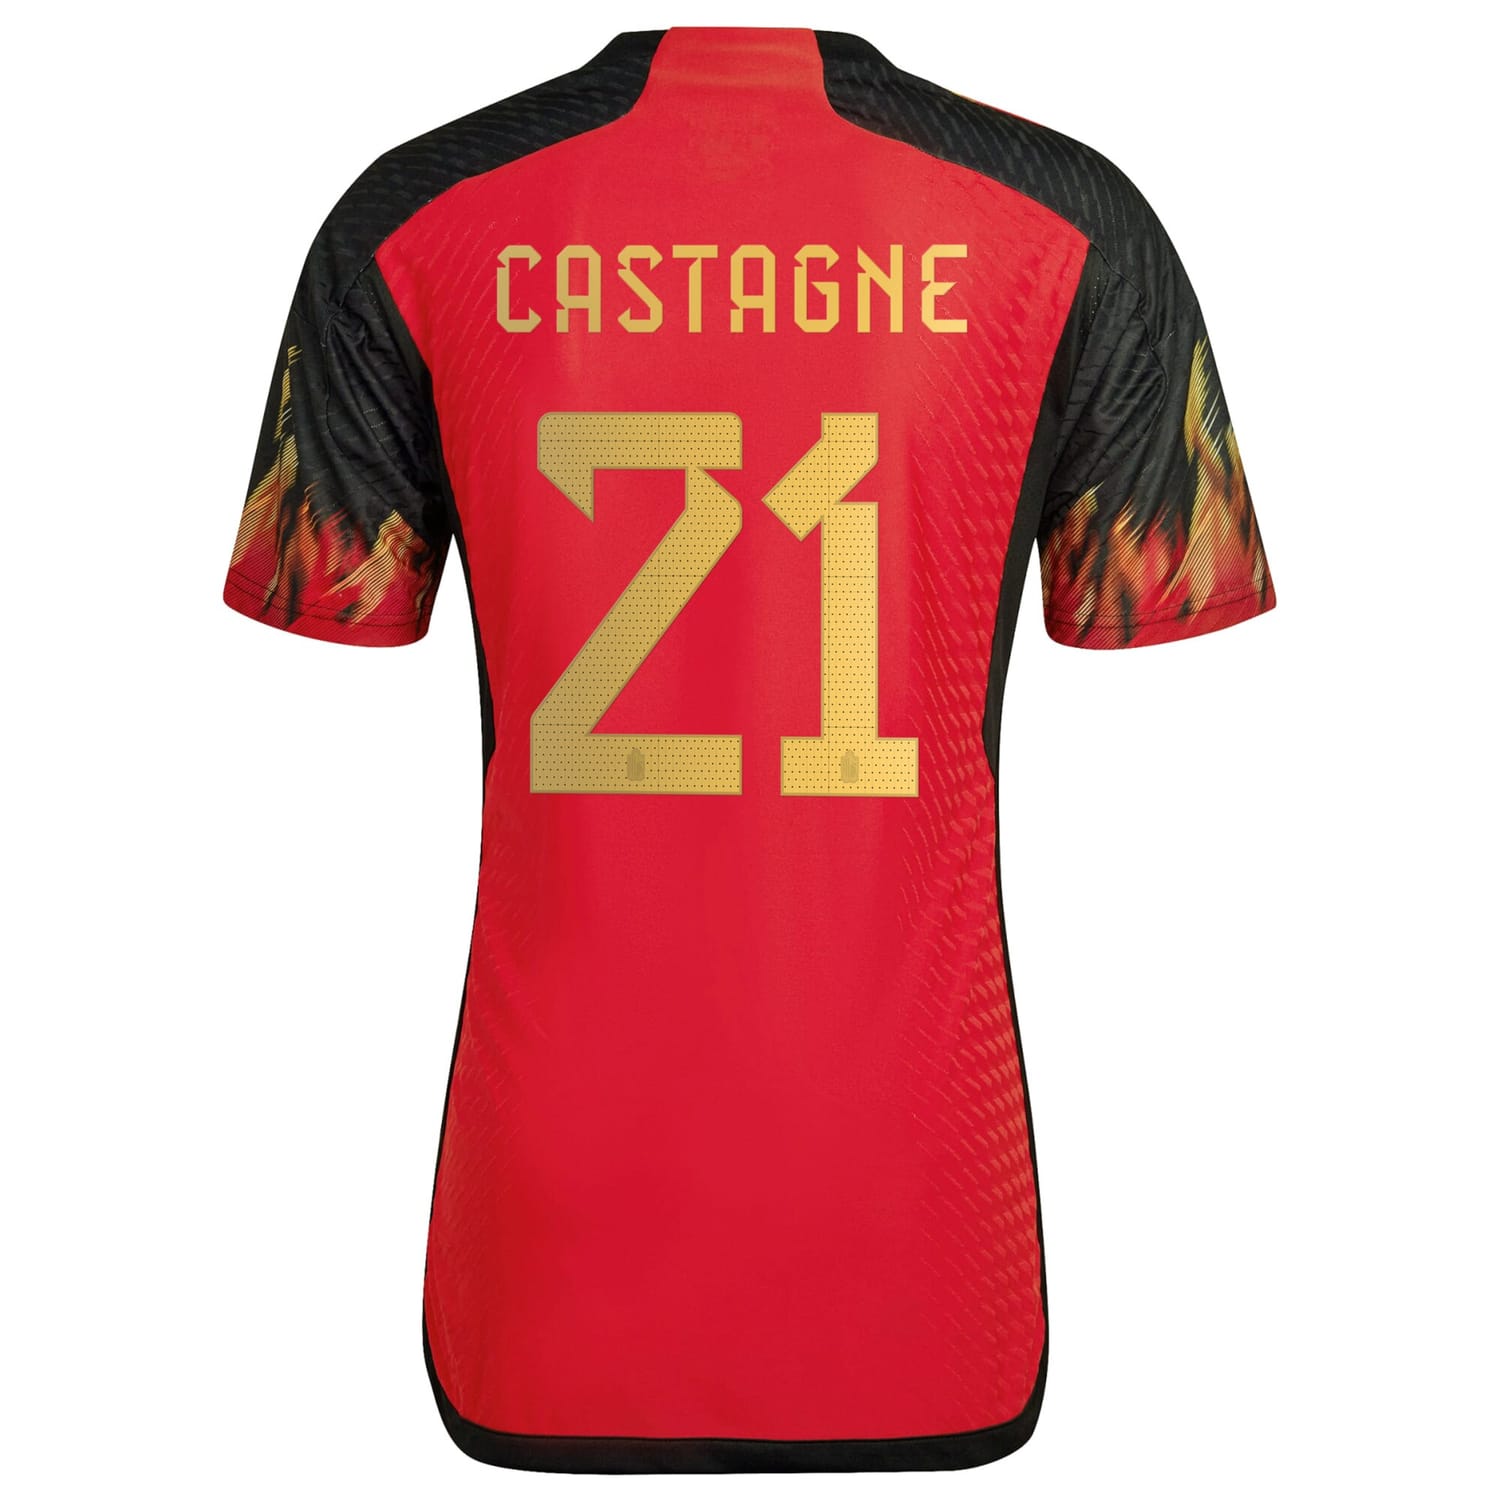 Belgium National Team Home Authentic Jersey Shirt 2022 player Timothy Castagne 21 printing for Men